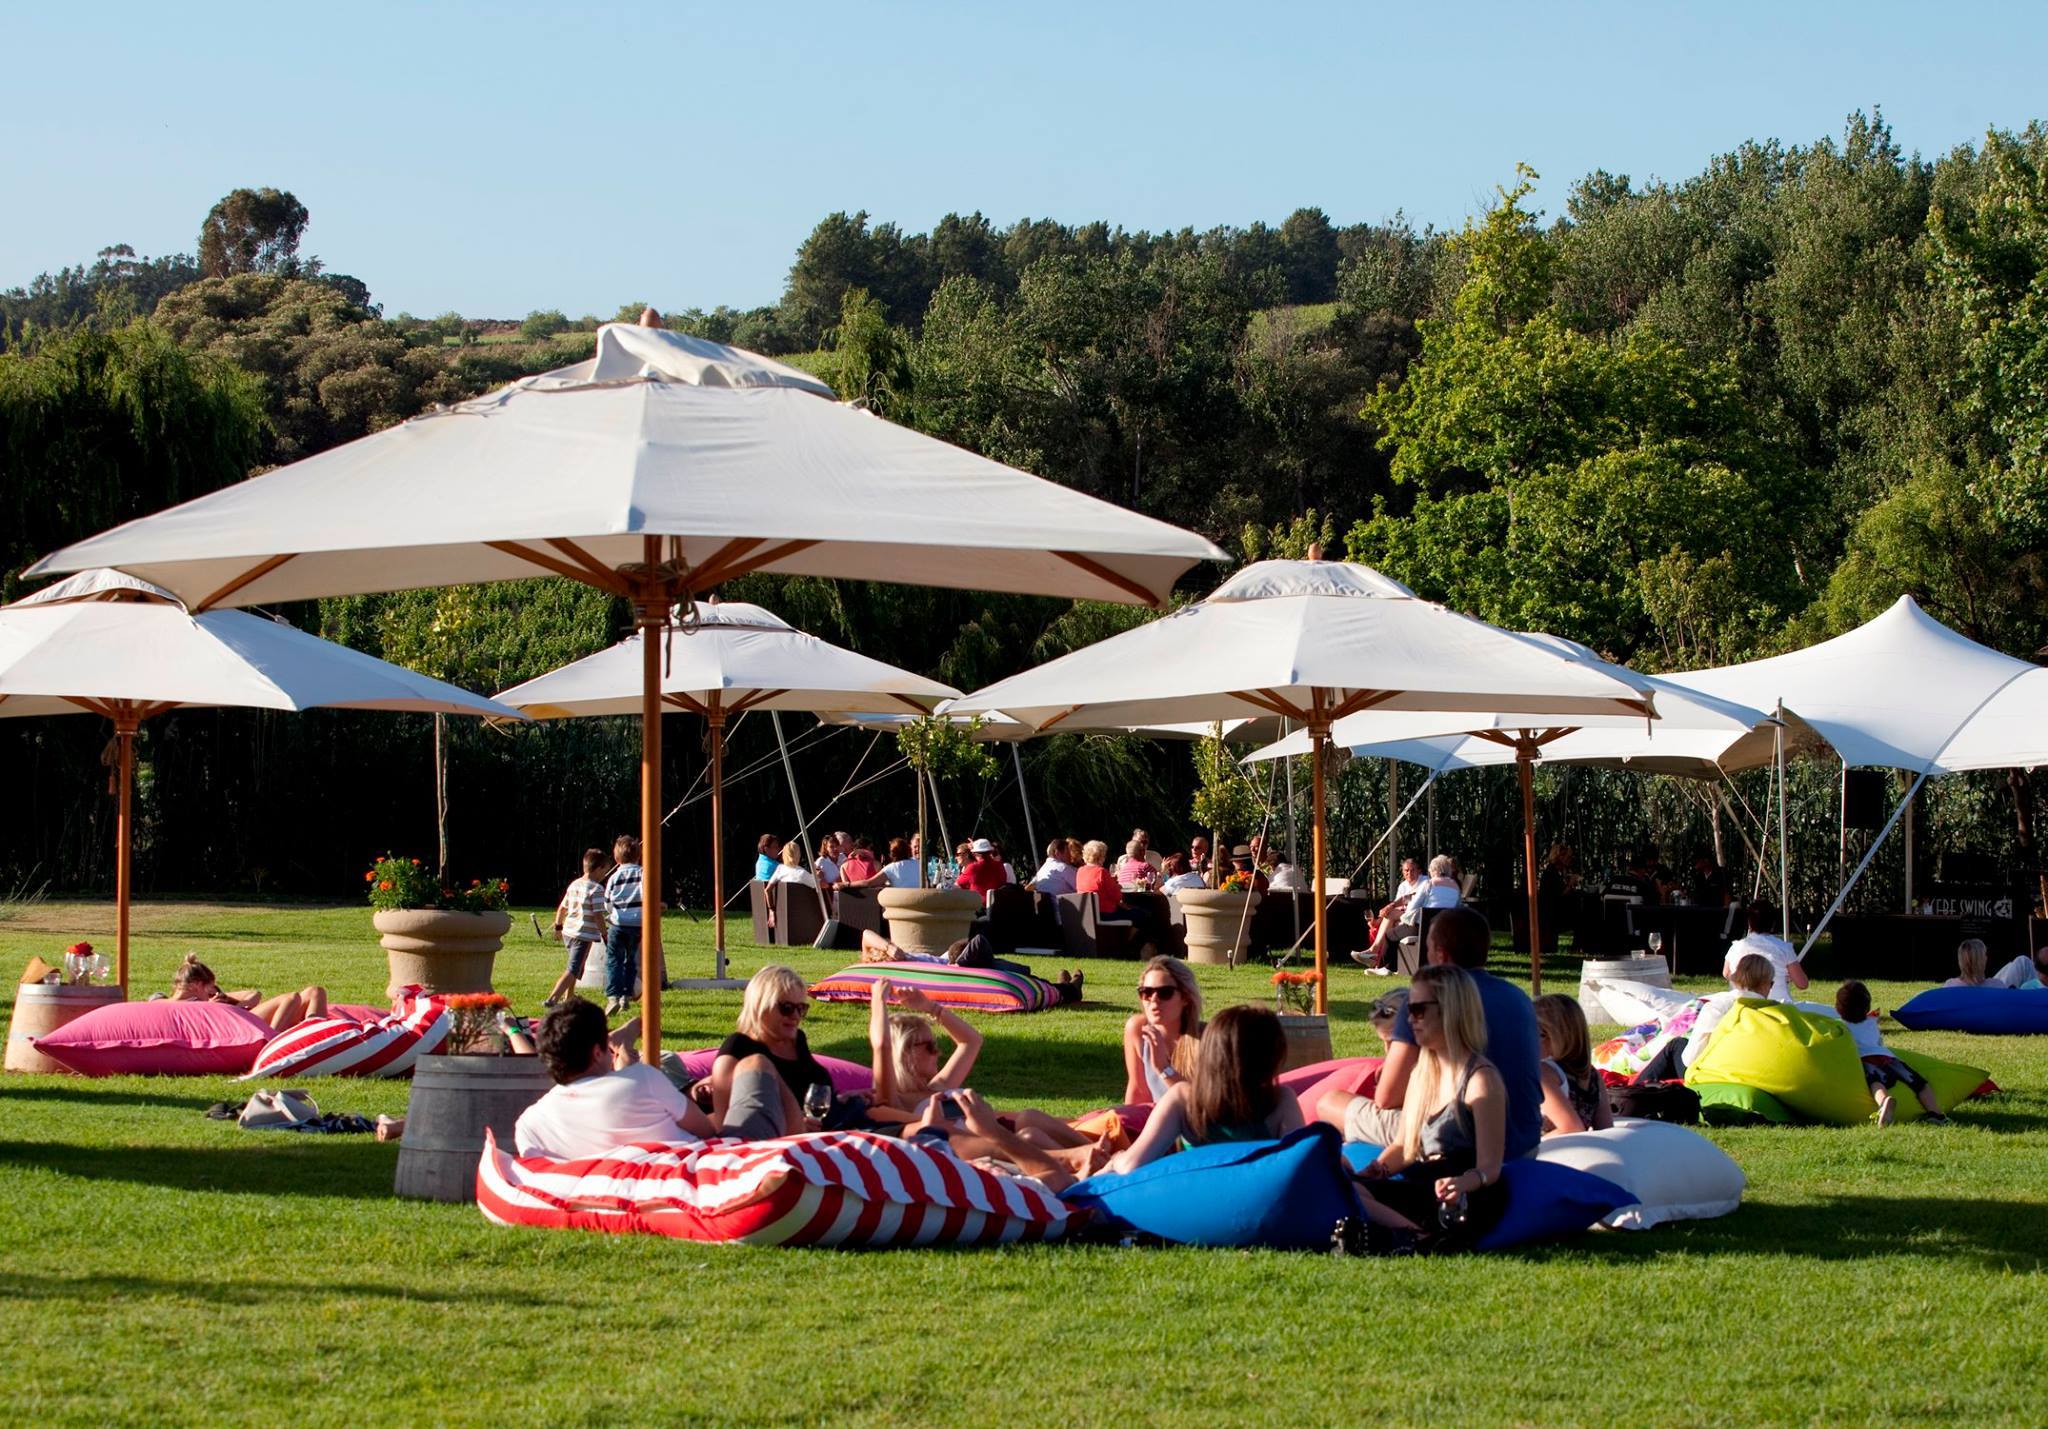 The Cape's Best Wineries - A Local's Guide, People Picnicking